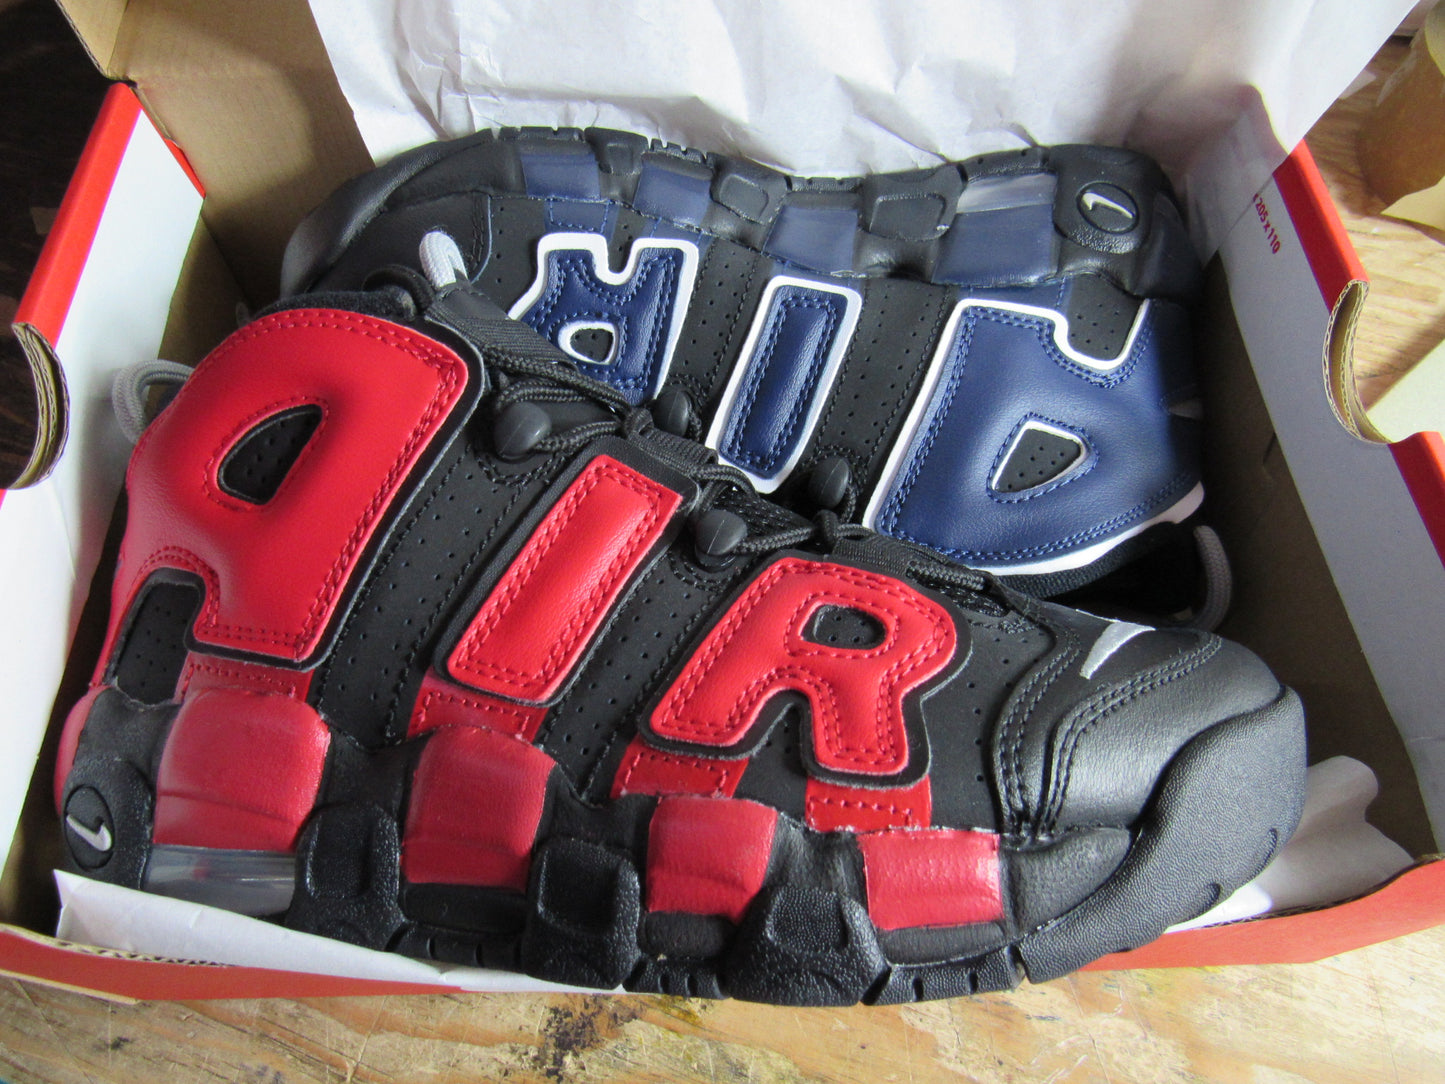 PIPPEN AIR MORE UPTEMPO GS KIDS "ALTERNATE" NAVY RED